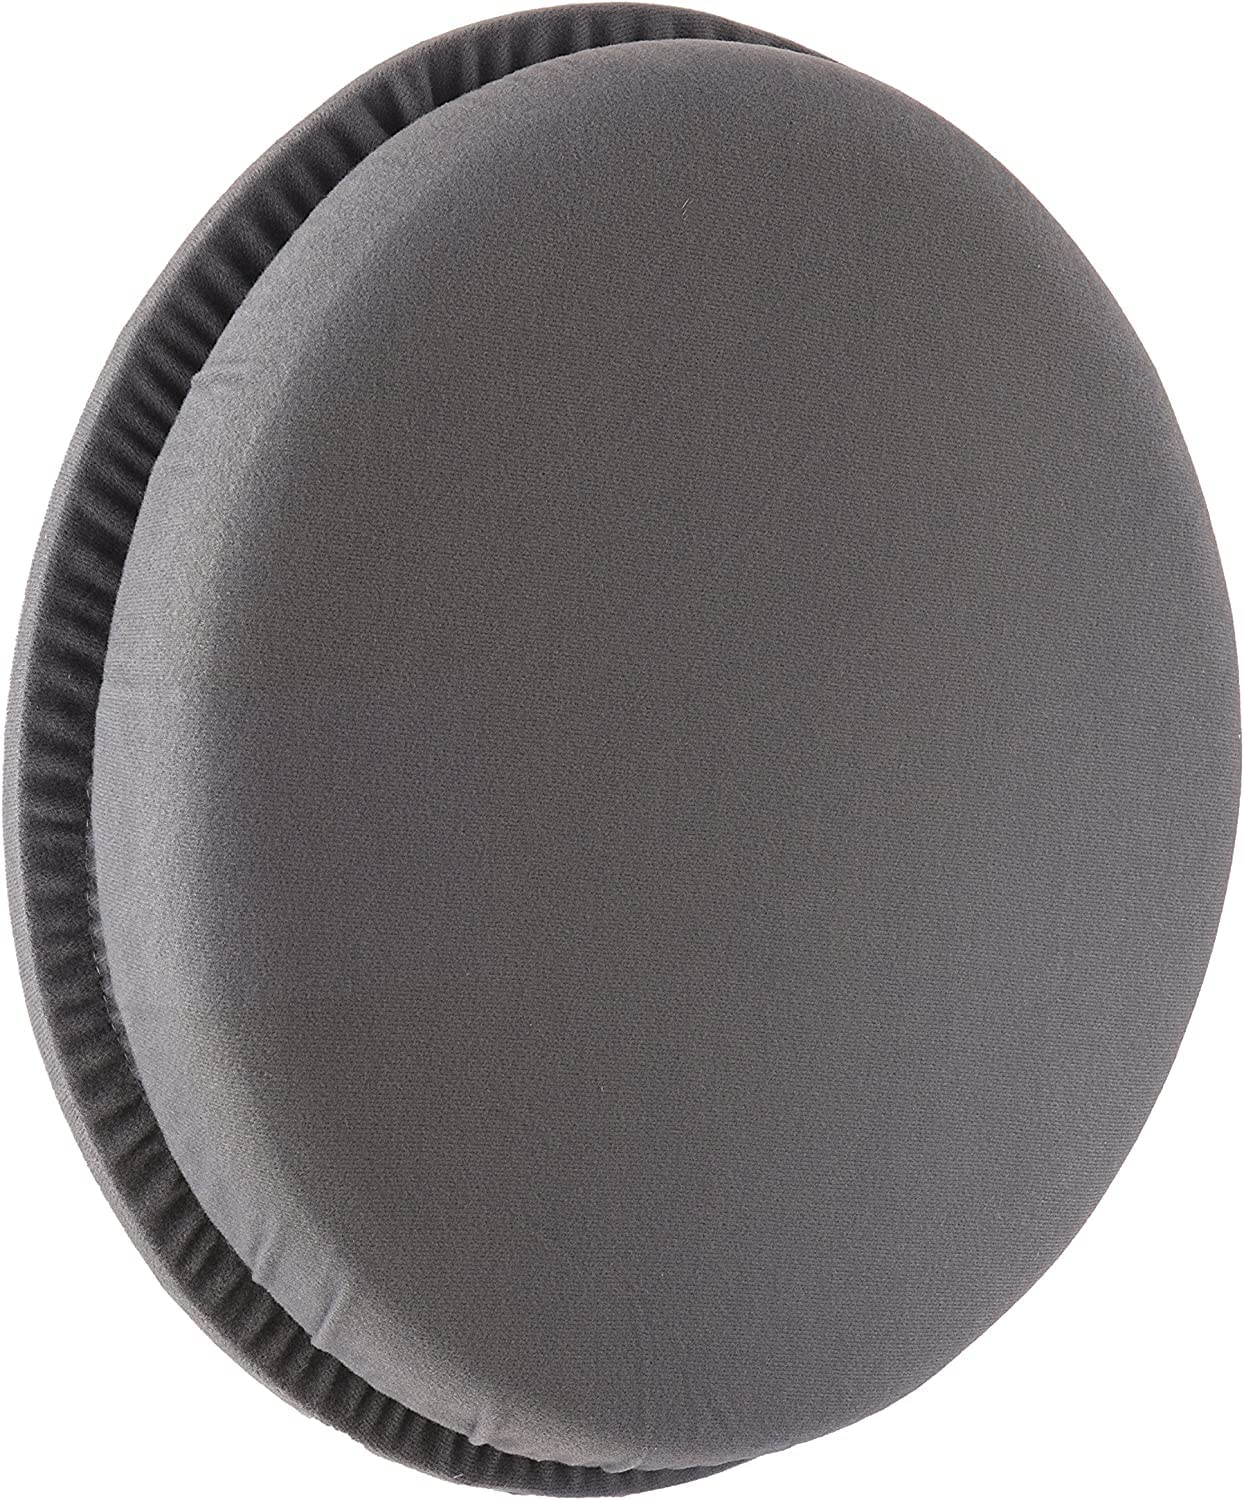 DMI 360 Degree Swivel Seat Cushion, Portable and Lightweight, Great for Home, Office or Travel, Gray